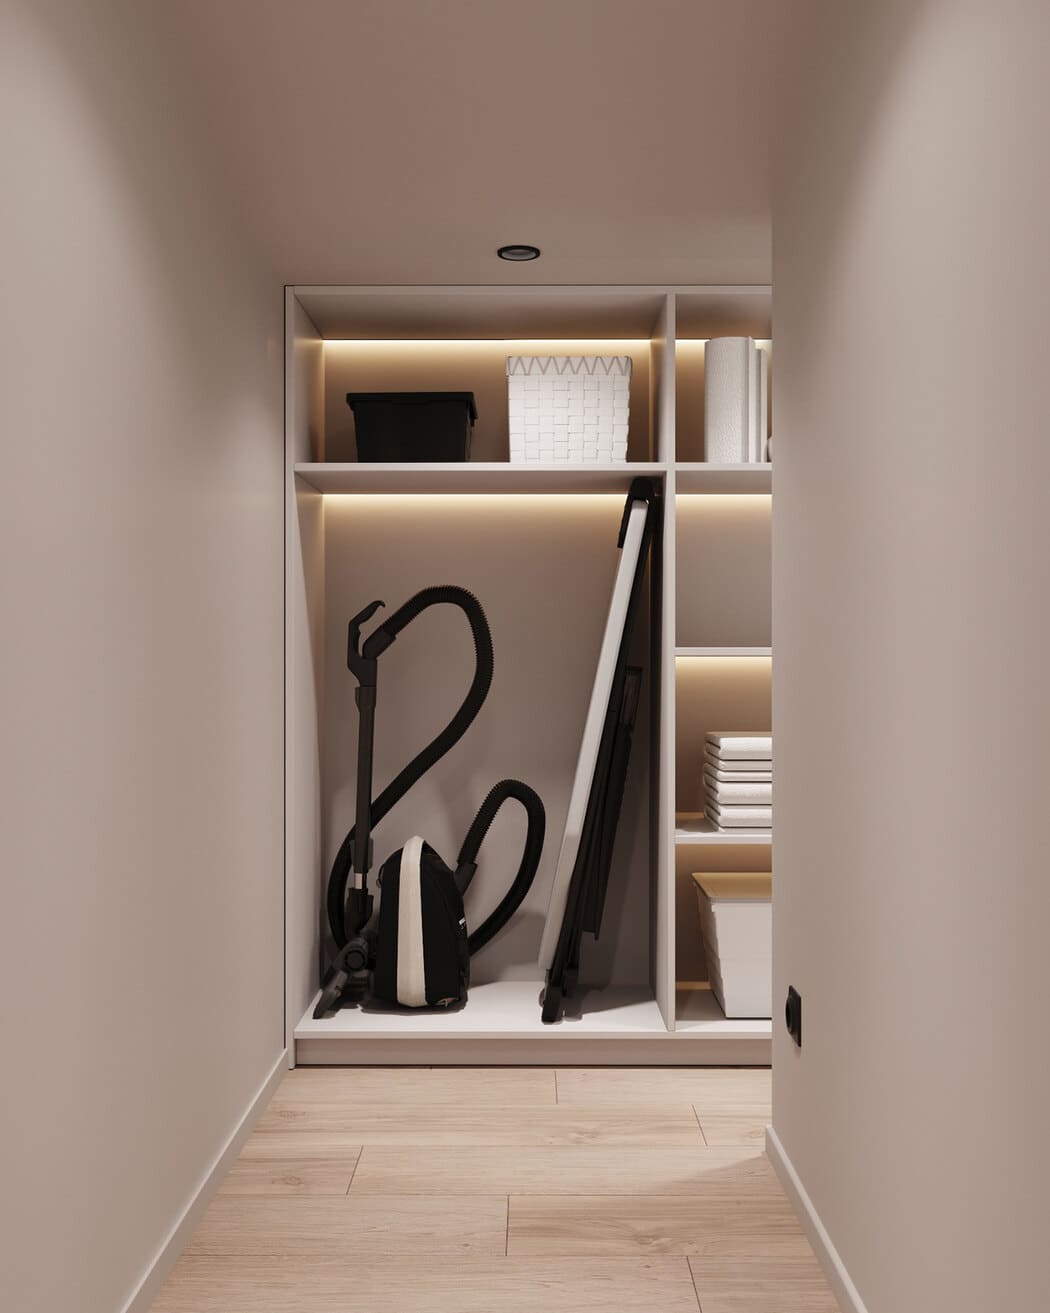 Aesthetic apartment for a young family, wardrobe, photo 10